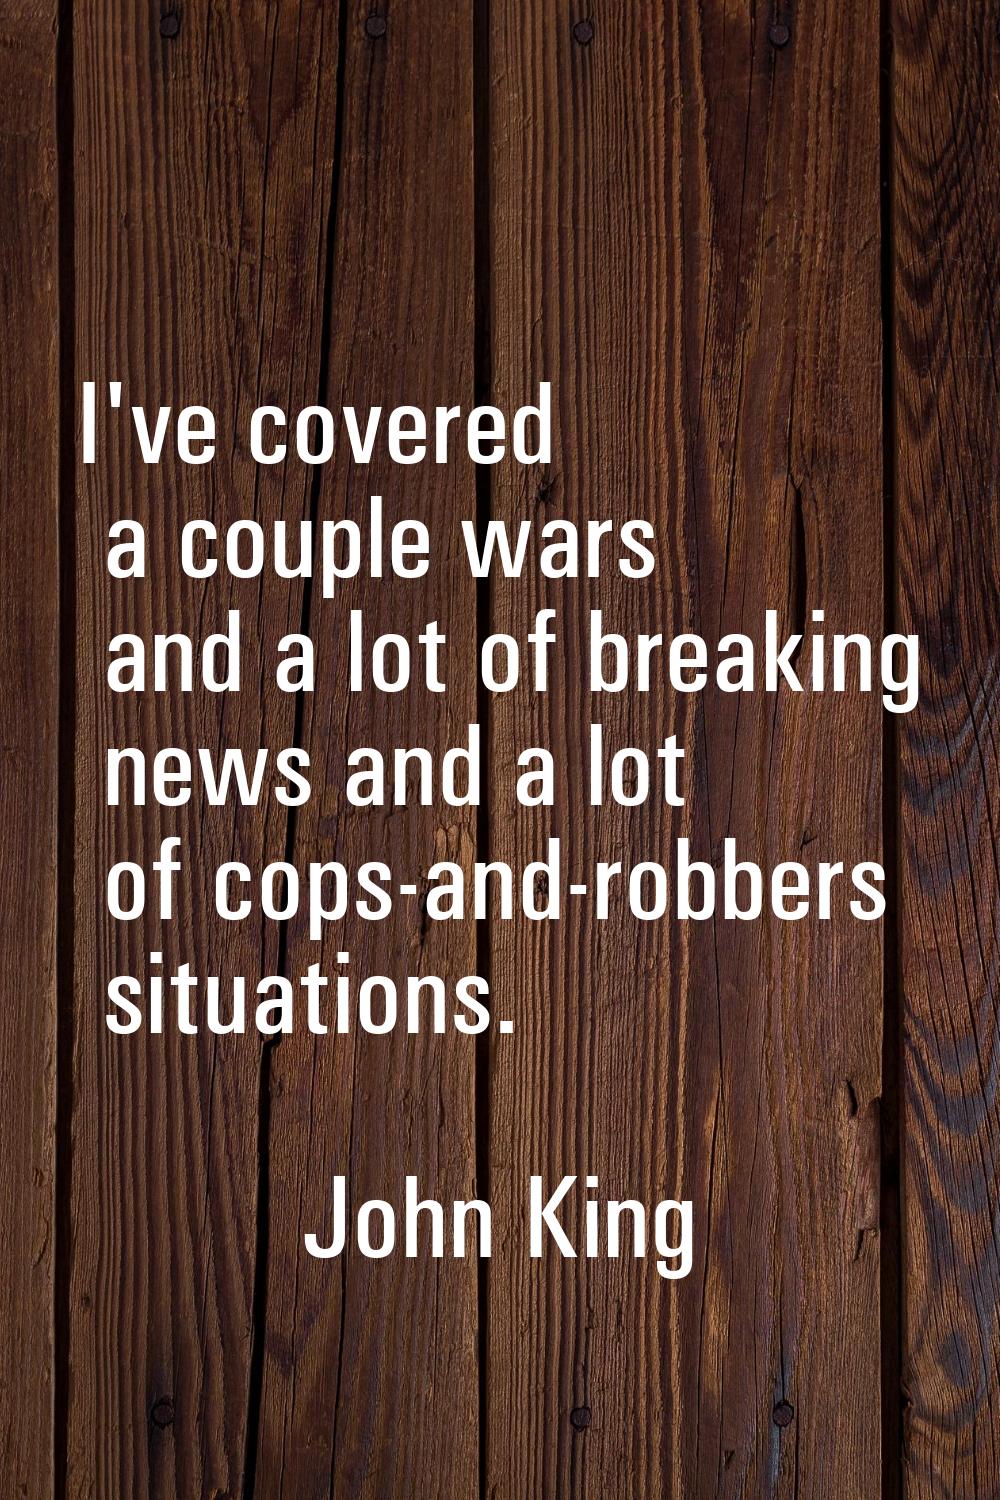 I've covered a couple wars and a lot of breaking news and a lot of cops-and-robbers situations.